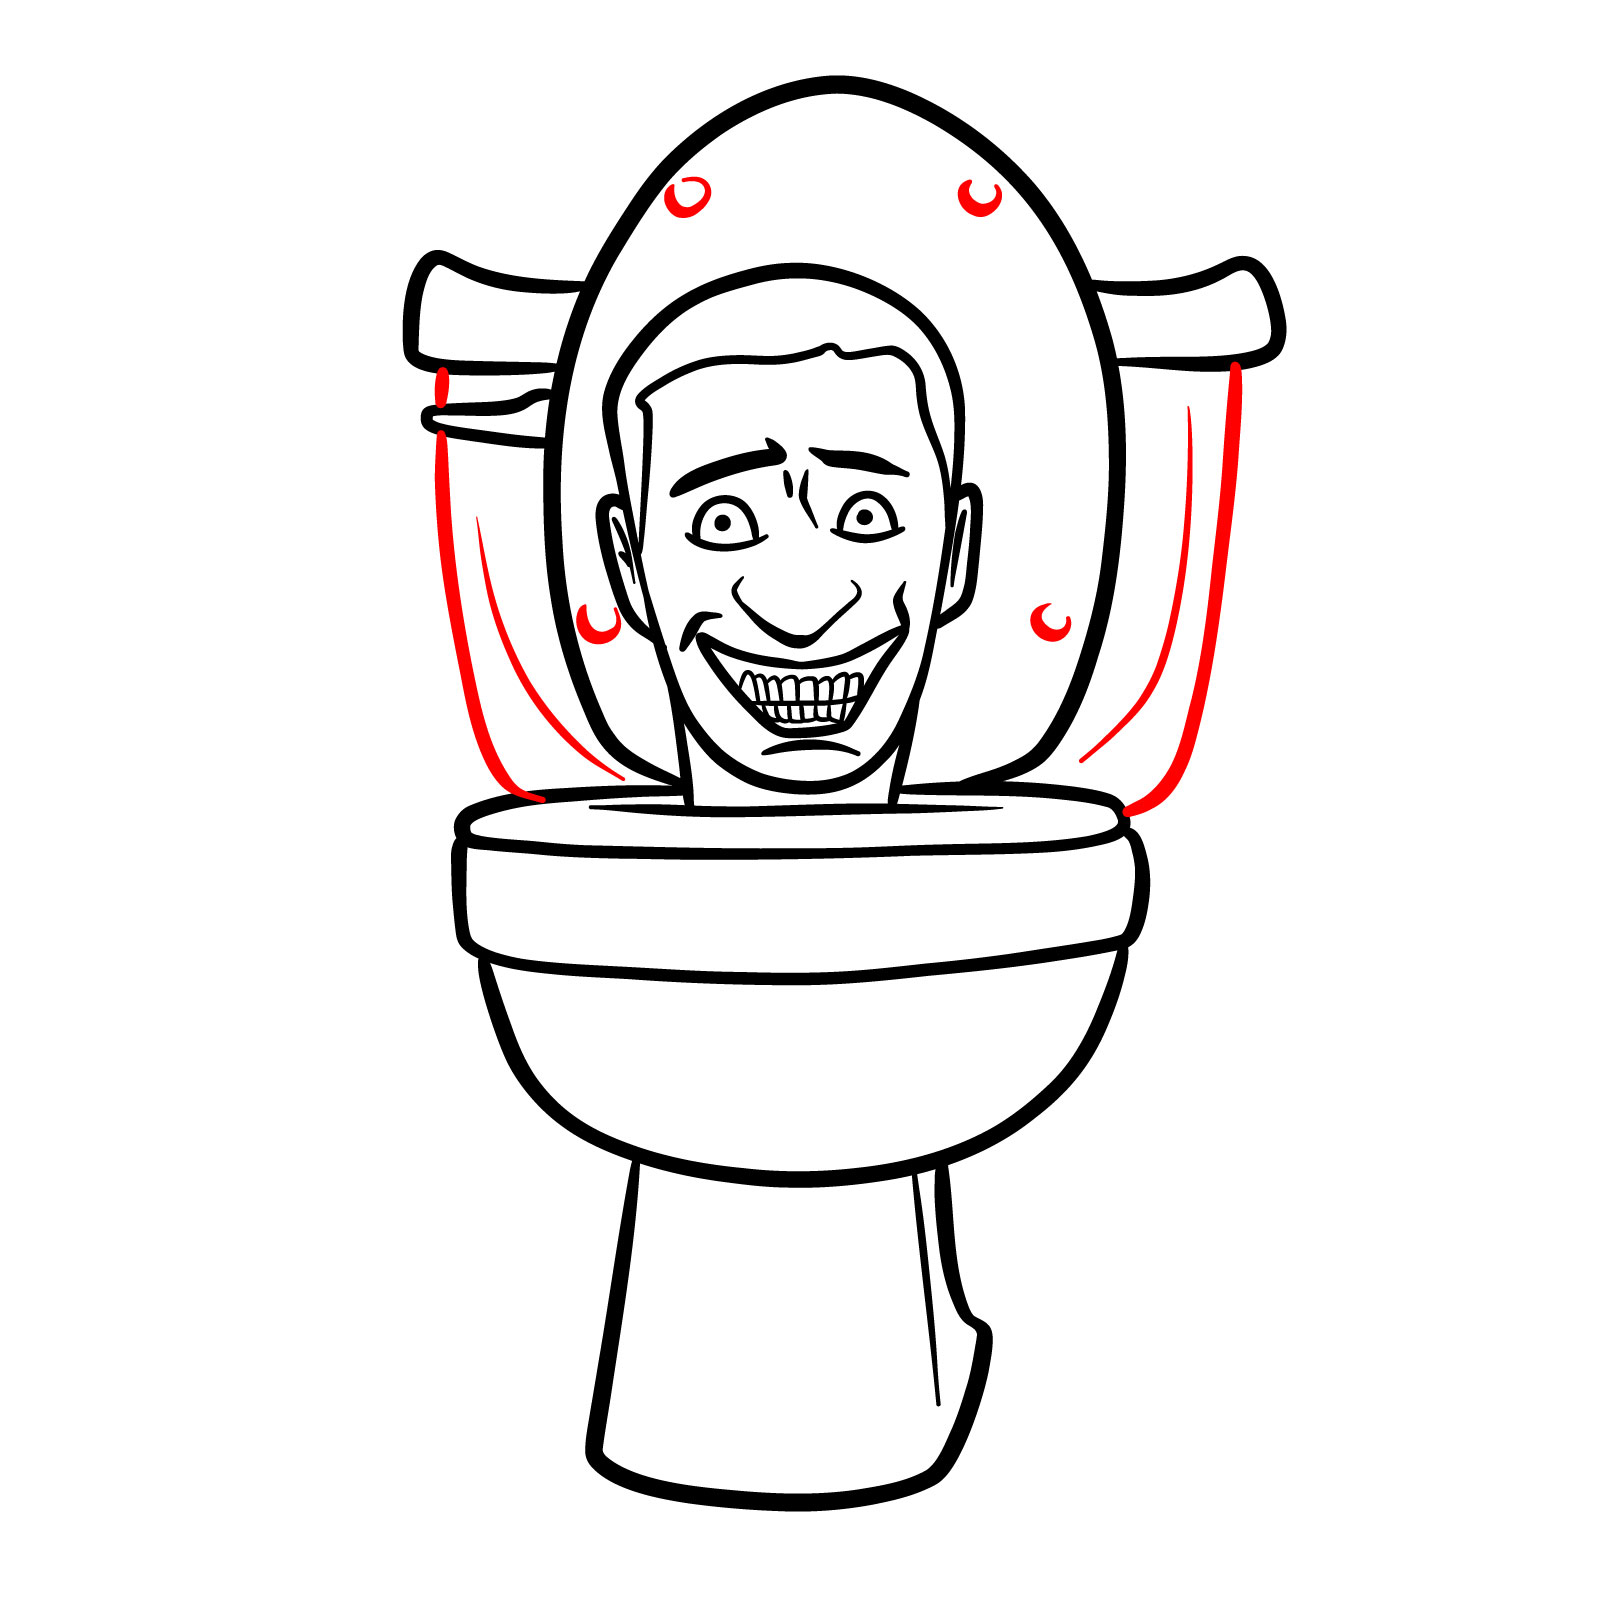 Drawing the main body of the toilet tank and decorative circular shapes on the lid - step 12